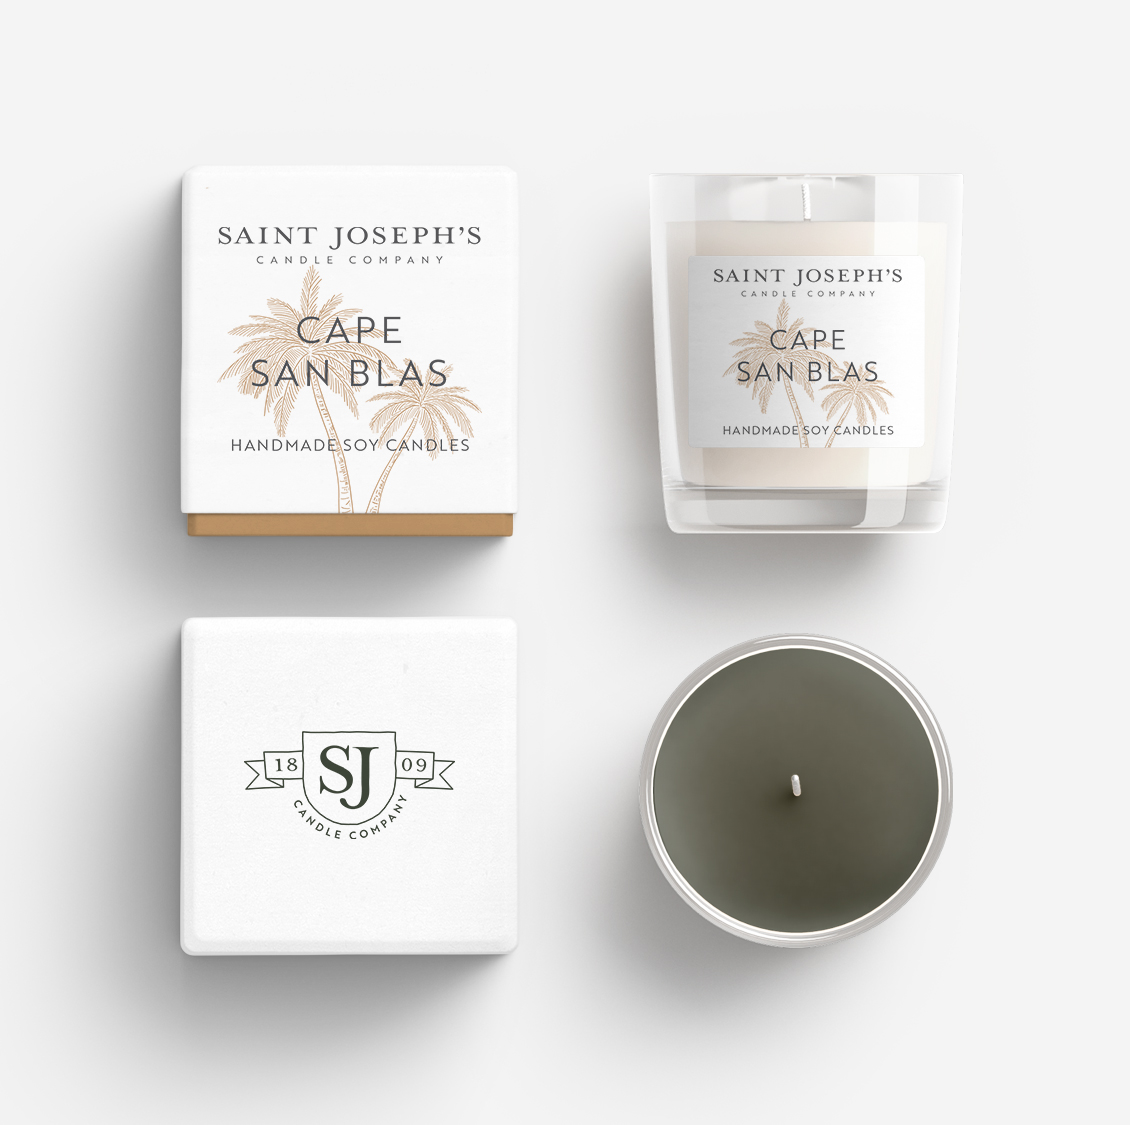 Brand and Packaging Design for Saint Joseph’s Candle Company